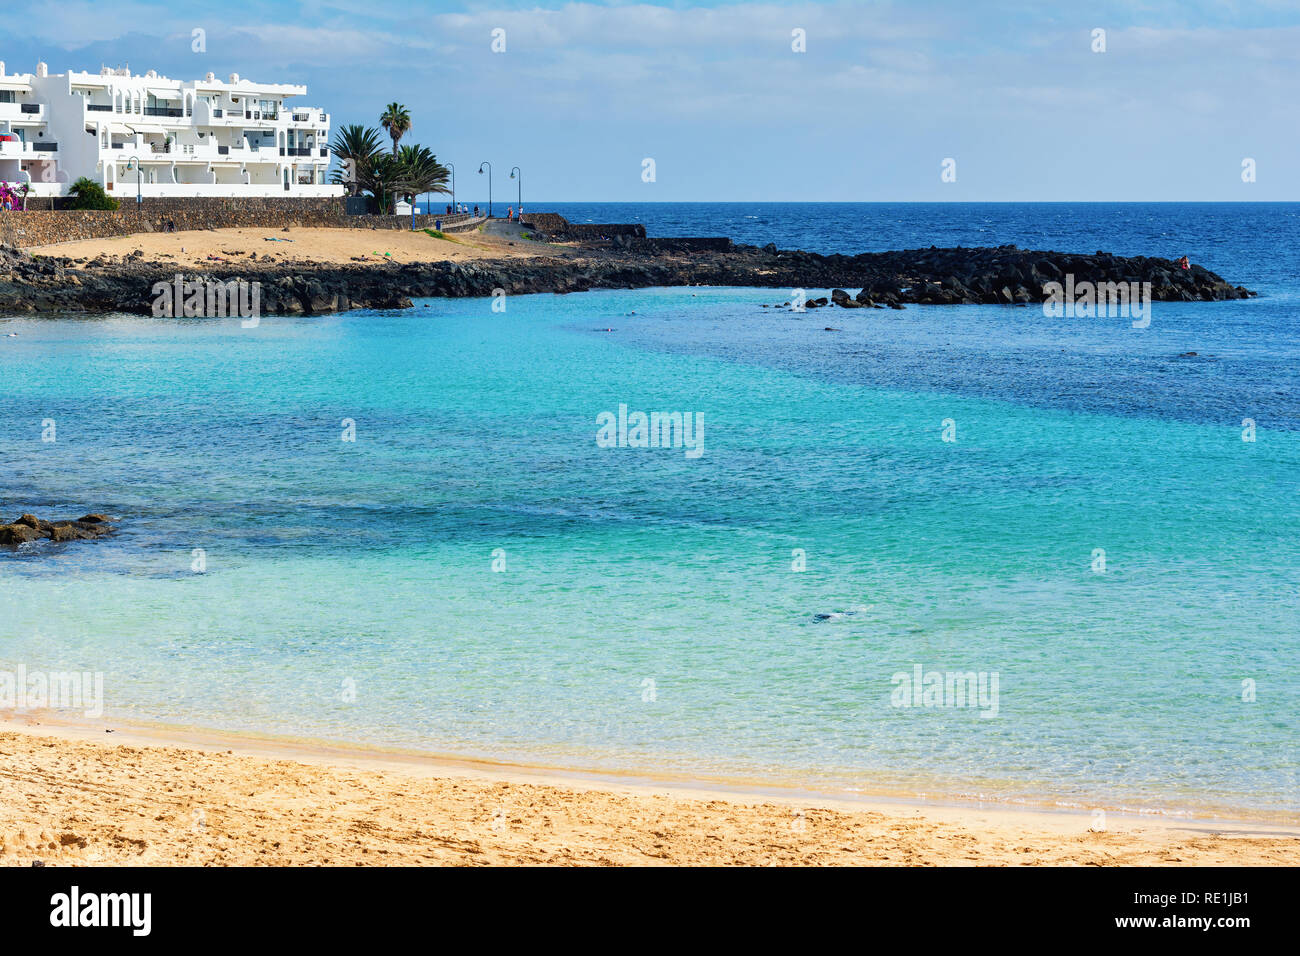 View of Playa Bastian beach in Costa Teguise, Lanzarote, Spain, clear turquoise waters, selective focus Stock Photo